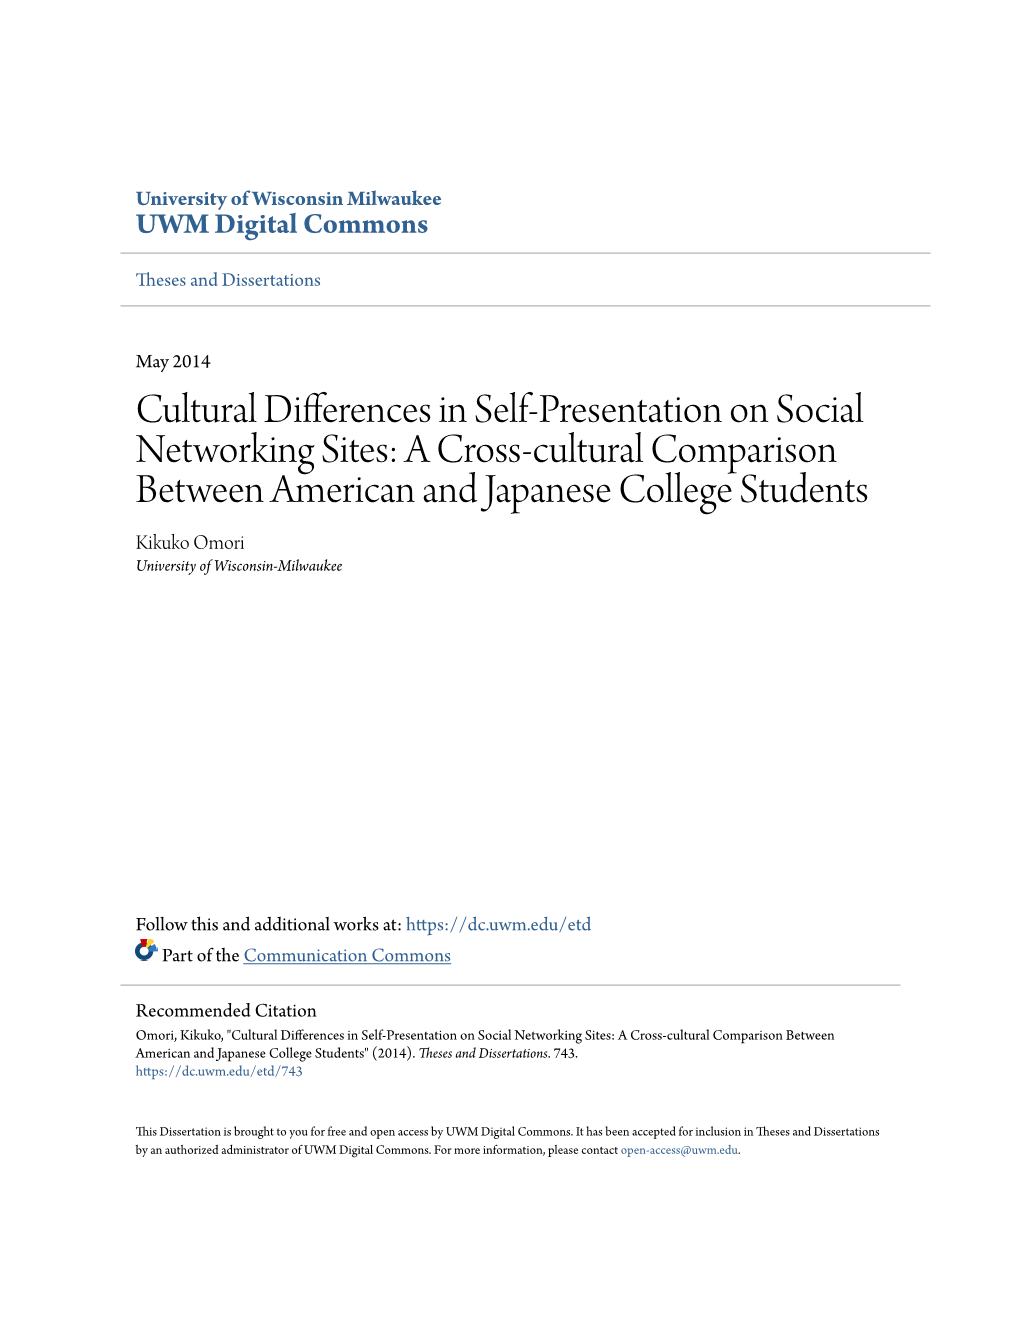 Cultural Differences in Self-Presentation on Social